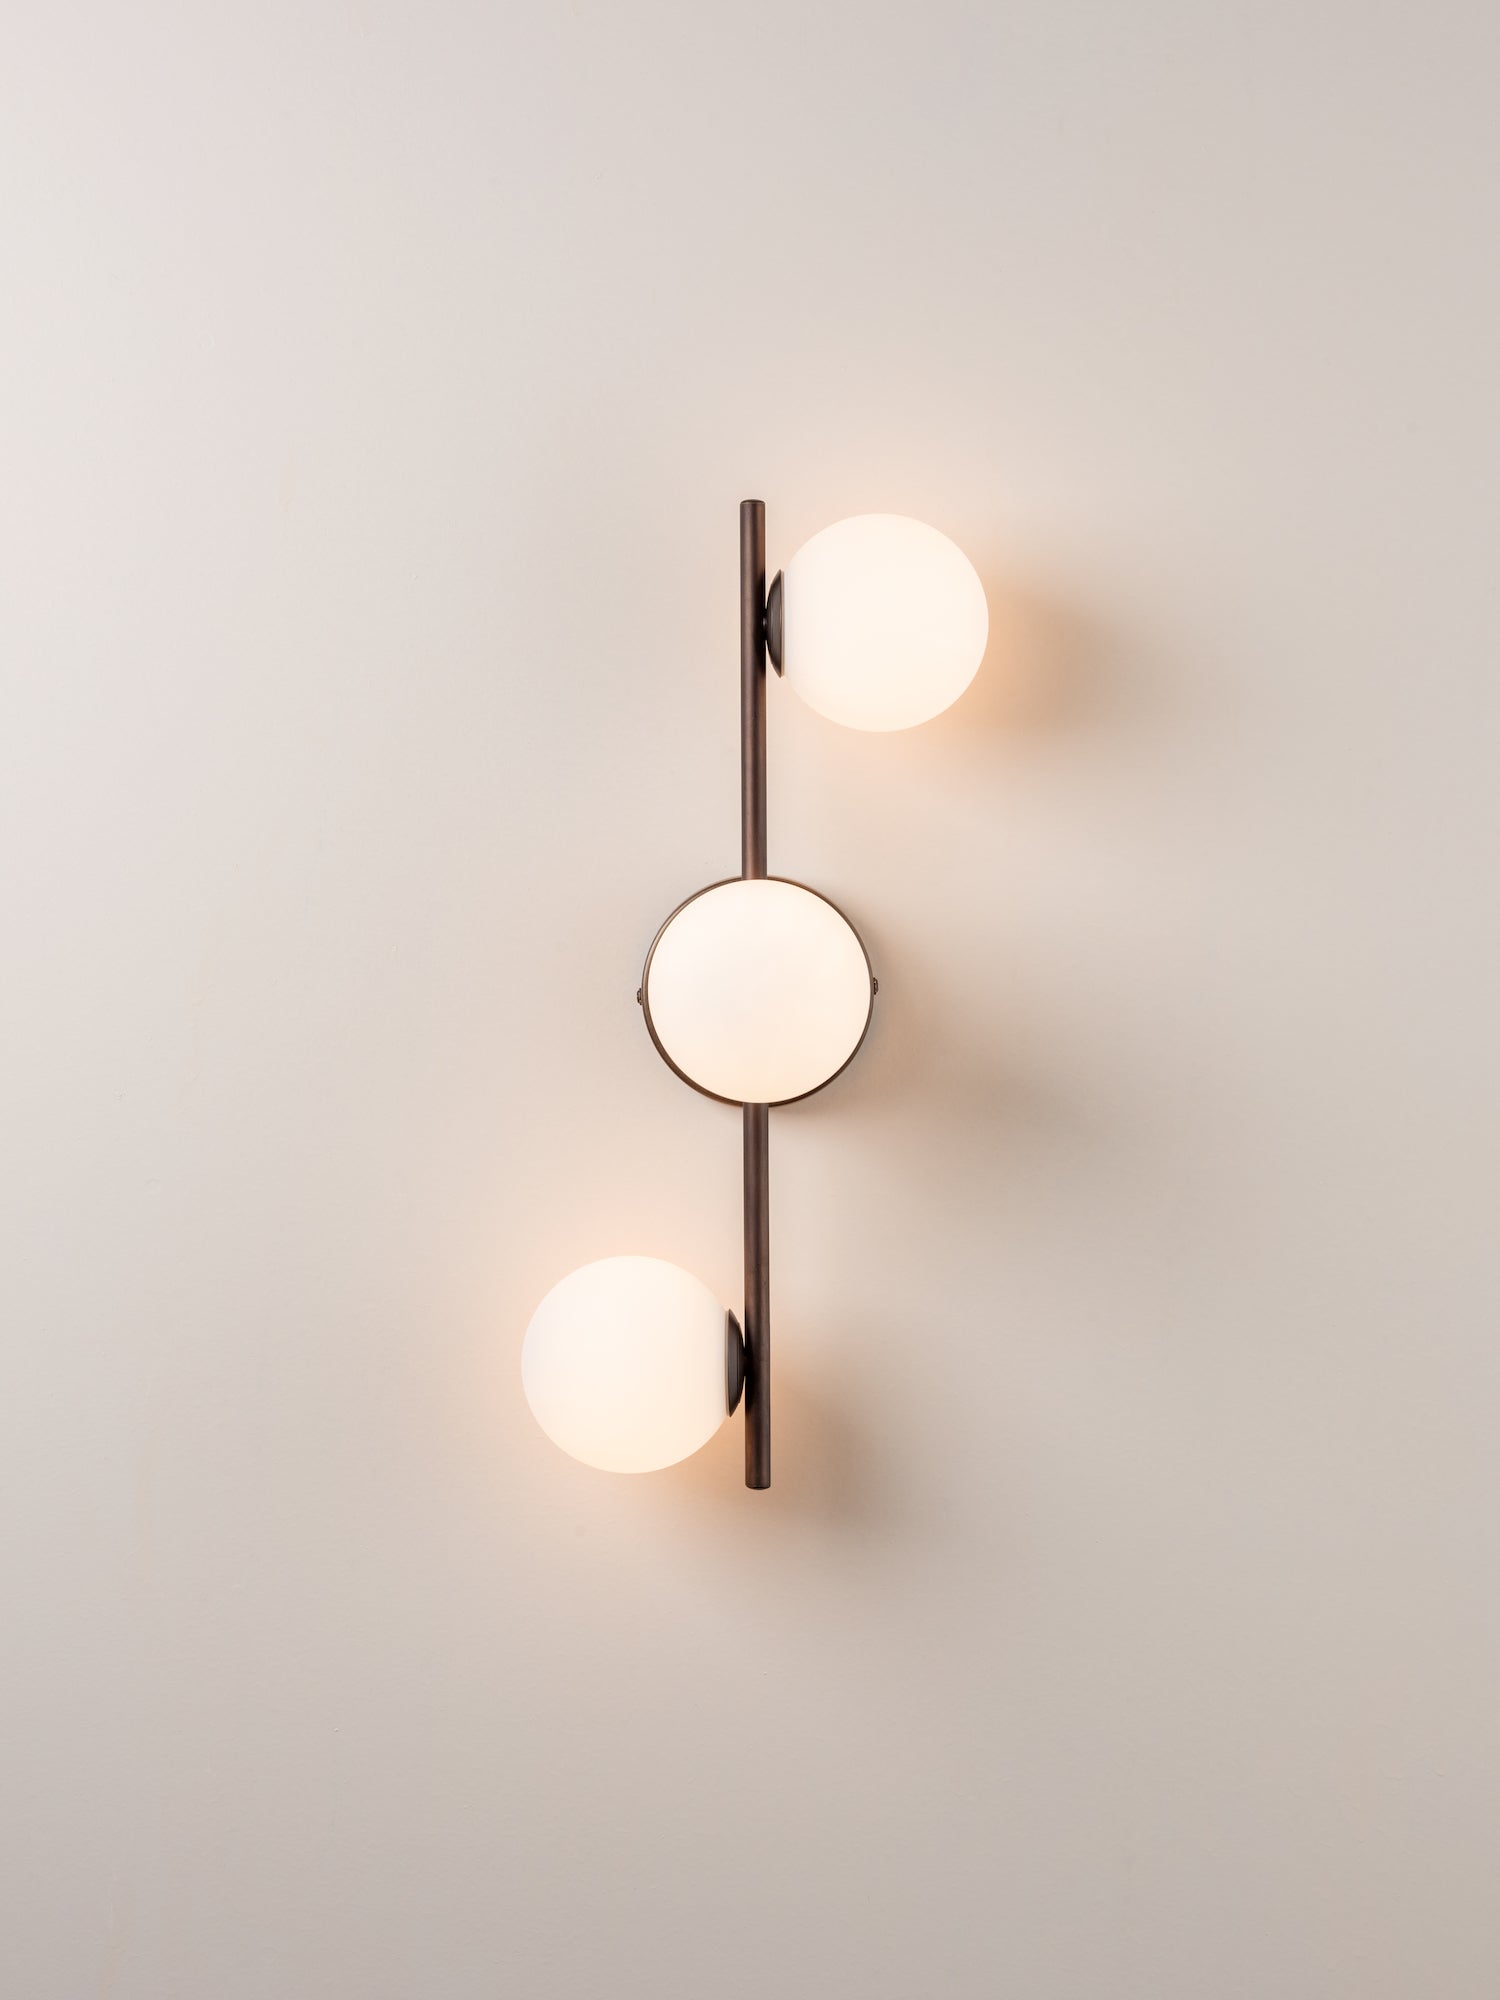 Coro - 3 light bronze and opal ceiling / wall | Ceiling Light | Lights & Lamps | UK